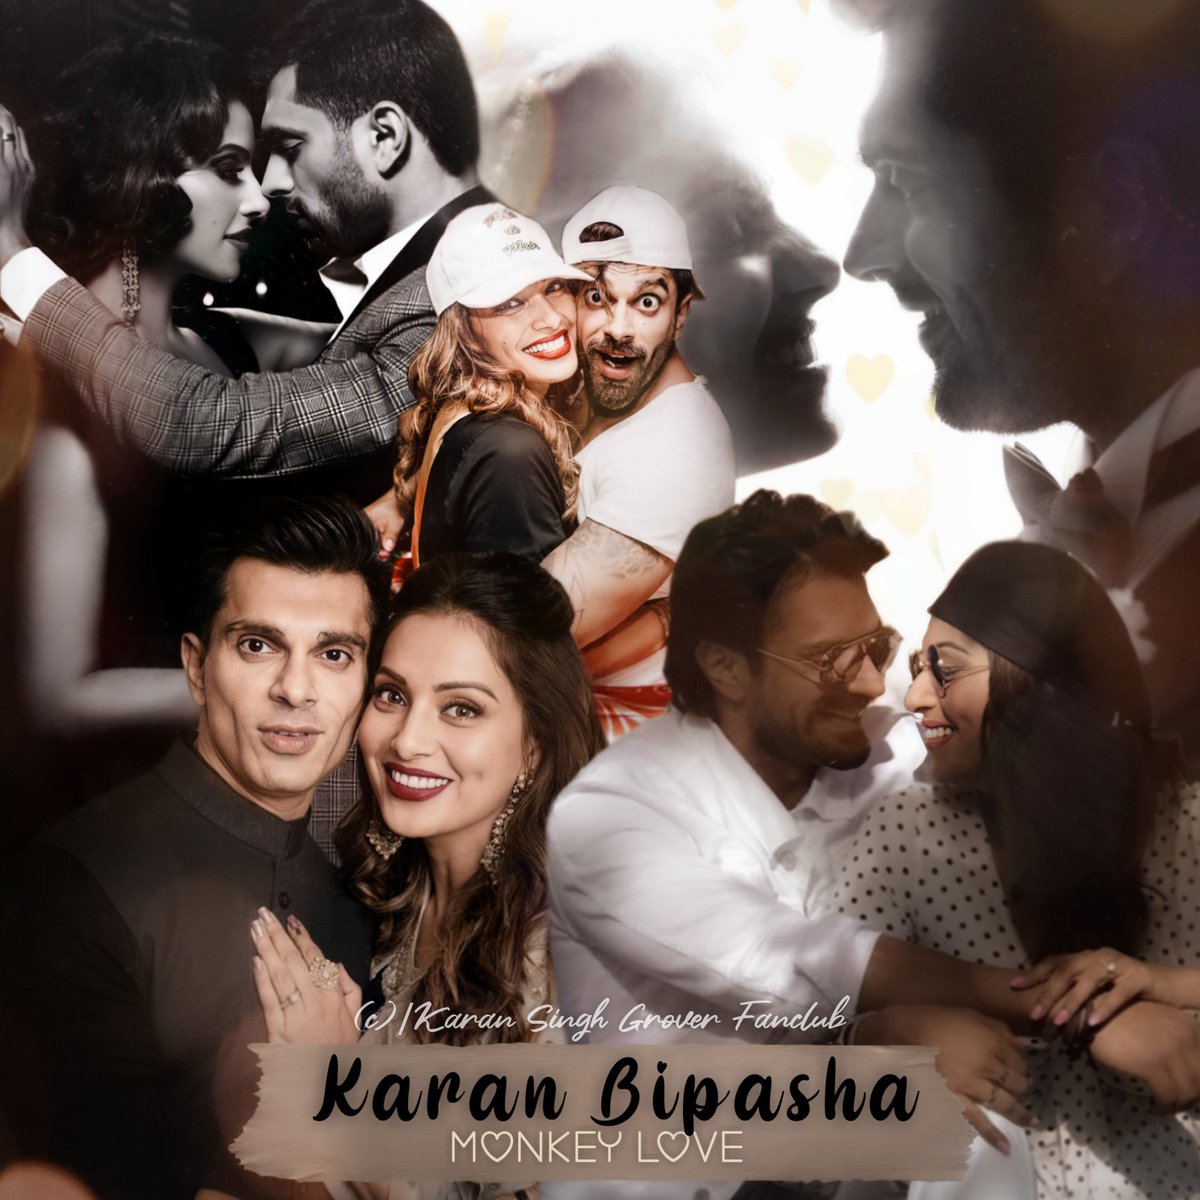 A thread show casting the jaw-dropping gorgeous creations made by  @odriksgian the magician for KSGFC  @indiaforums  #KaranSinghGrover  *friends and family